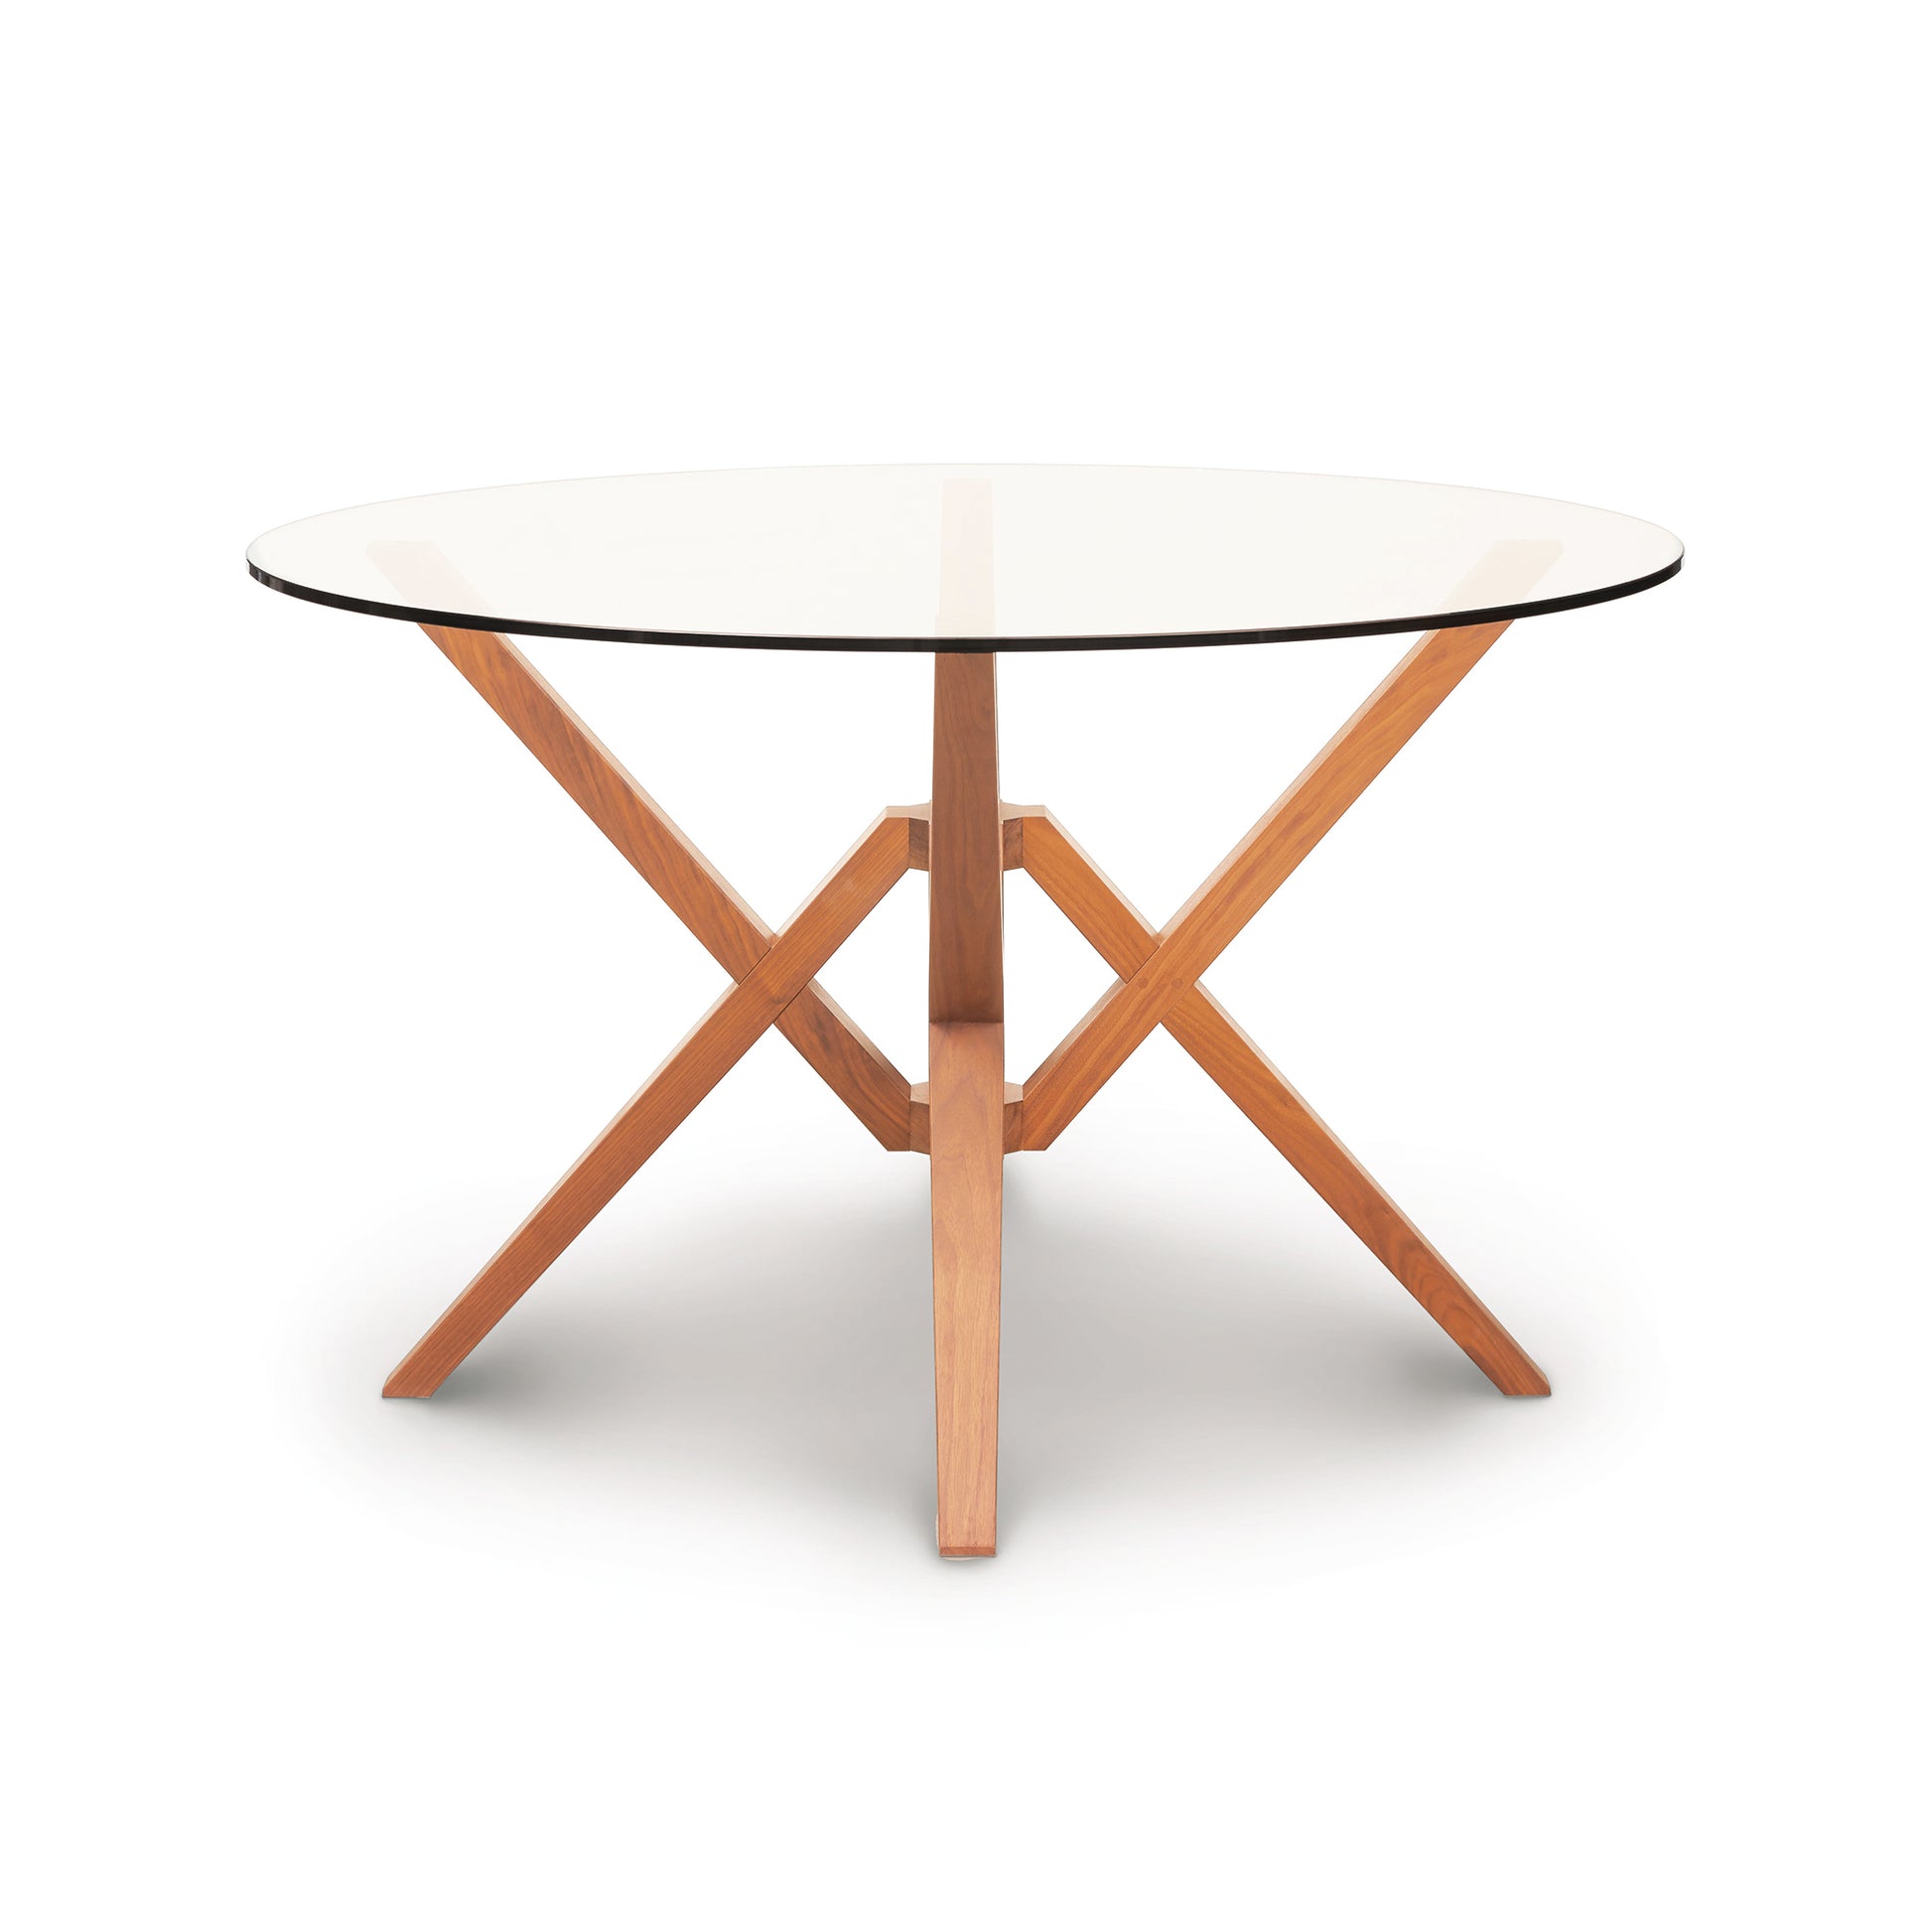 The Copeland Furniture Exeter Round Glass Top Table features an innovative isometric design with wooden legs and a glass top.